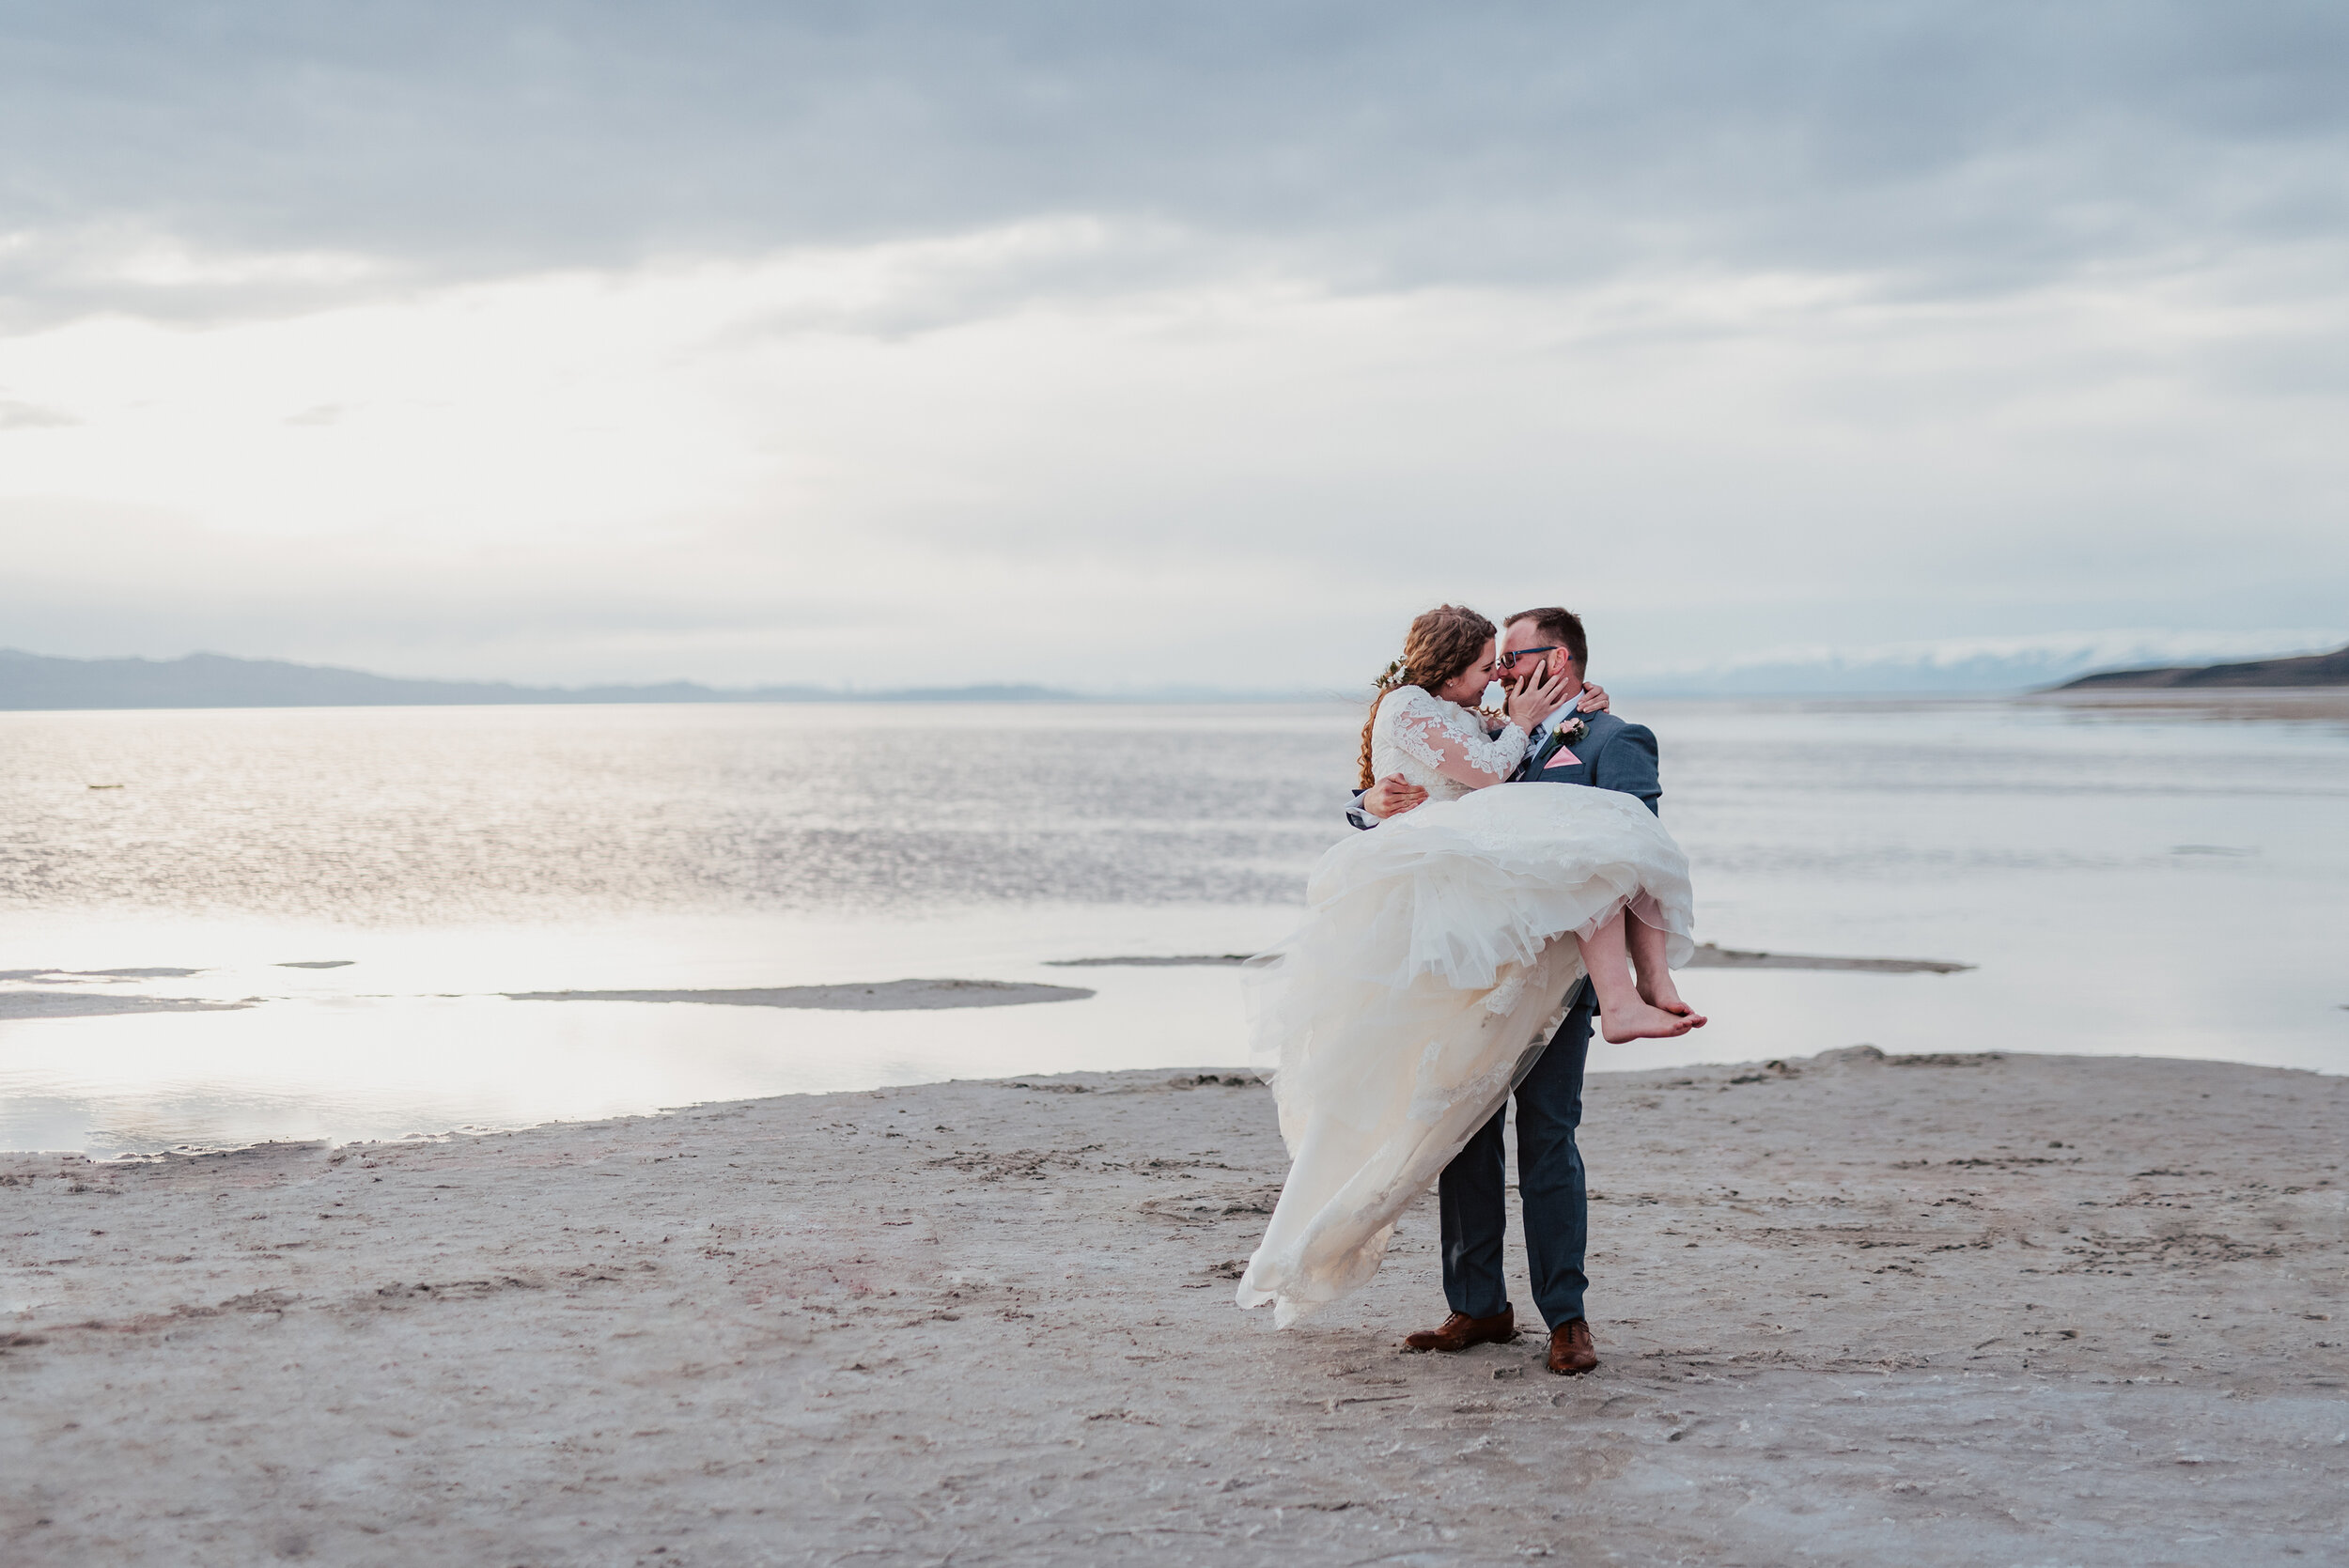 Bride being carried across the sand as her wedding gown blew in the wind at the Spiral Jetty in northern Utah. wedding formal photoshoot in Spiral Jetty Northern Utah Great Salt Lake photography wedding formals natural photo aesthetic bride and groom #spiraljetty #utahphotography #weddingformals #gettingmarried #weddingattire #utahwedding #greatoutdoorswedding #weddingformalsphotoshoot #naturalbeauty